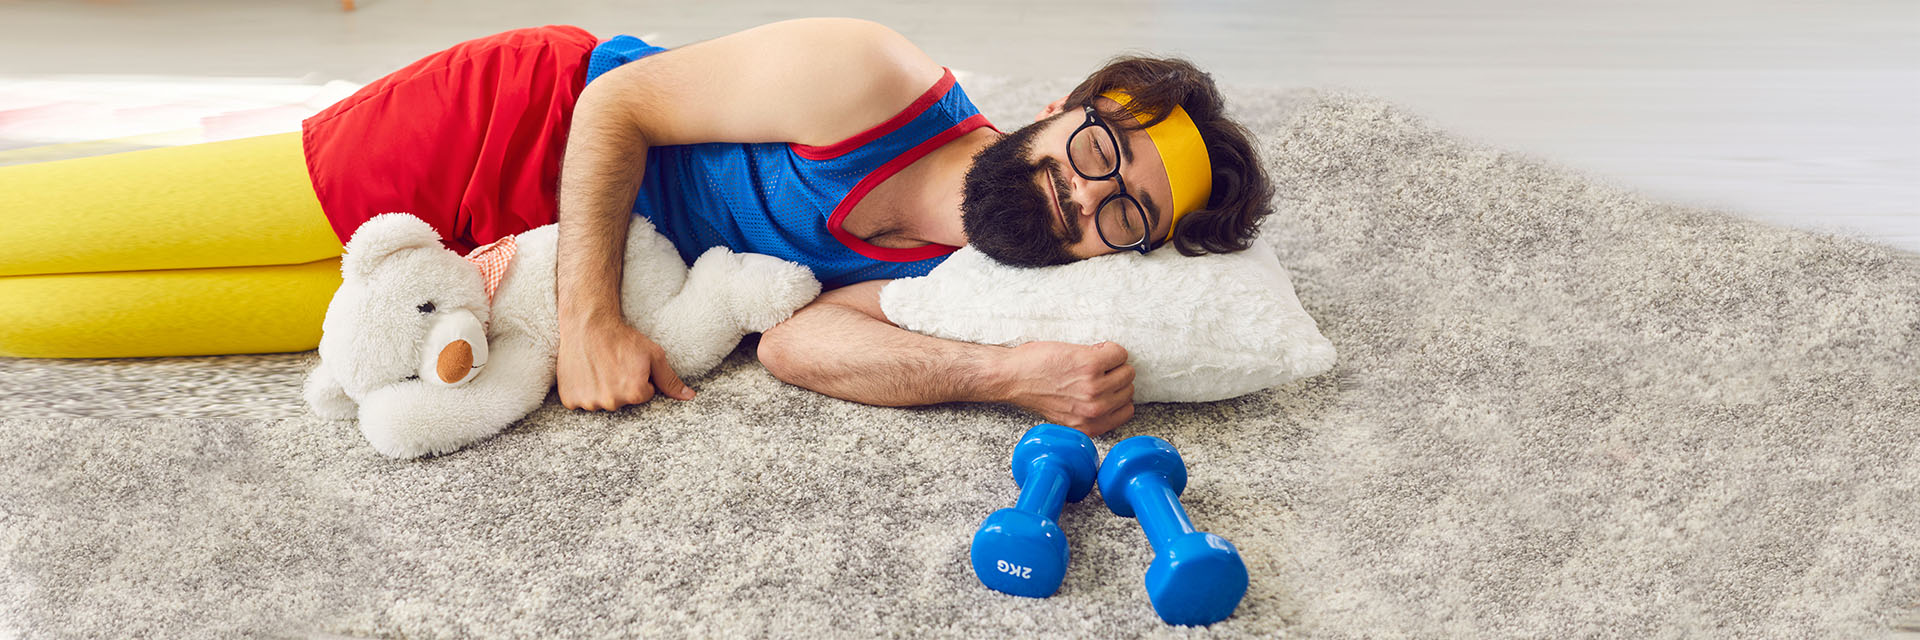 Man in exercise clothes laying on floor